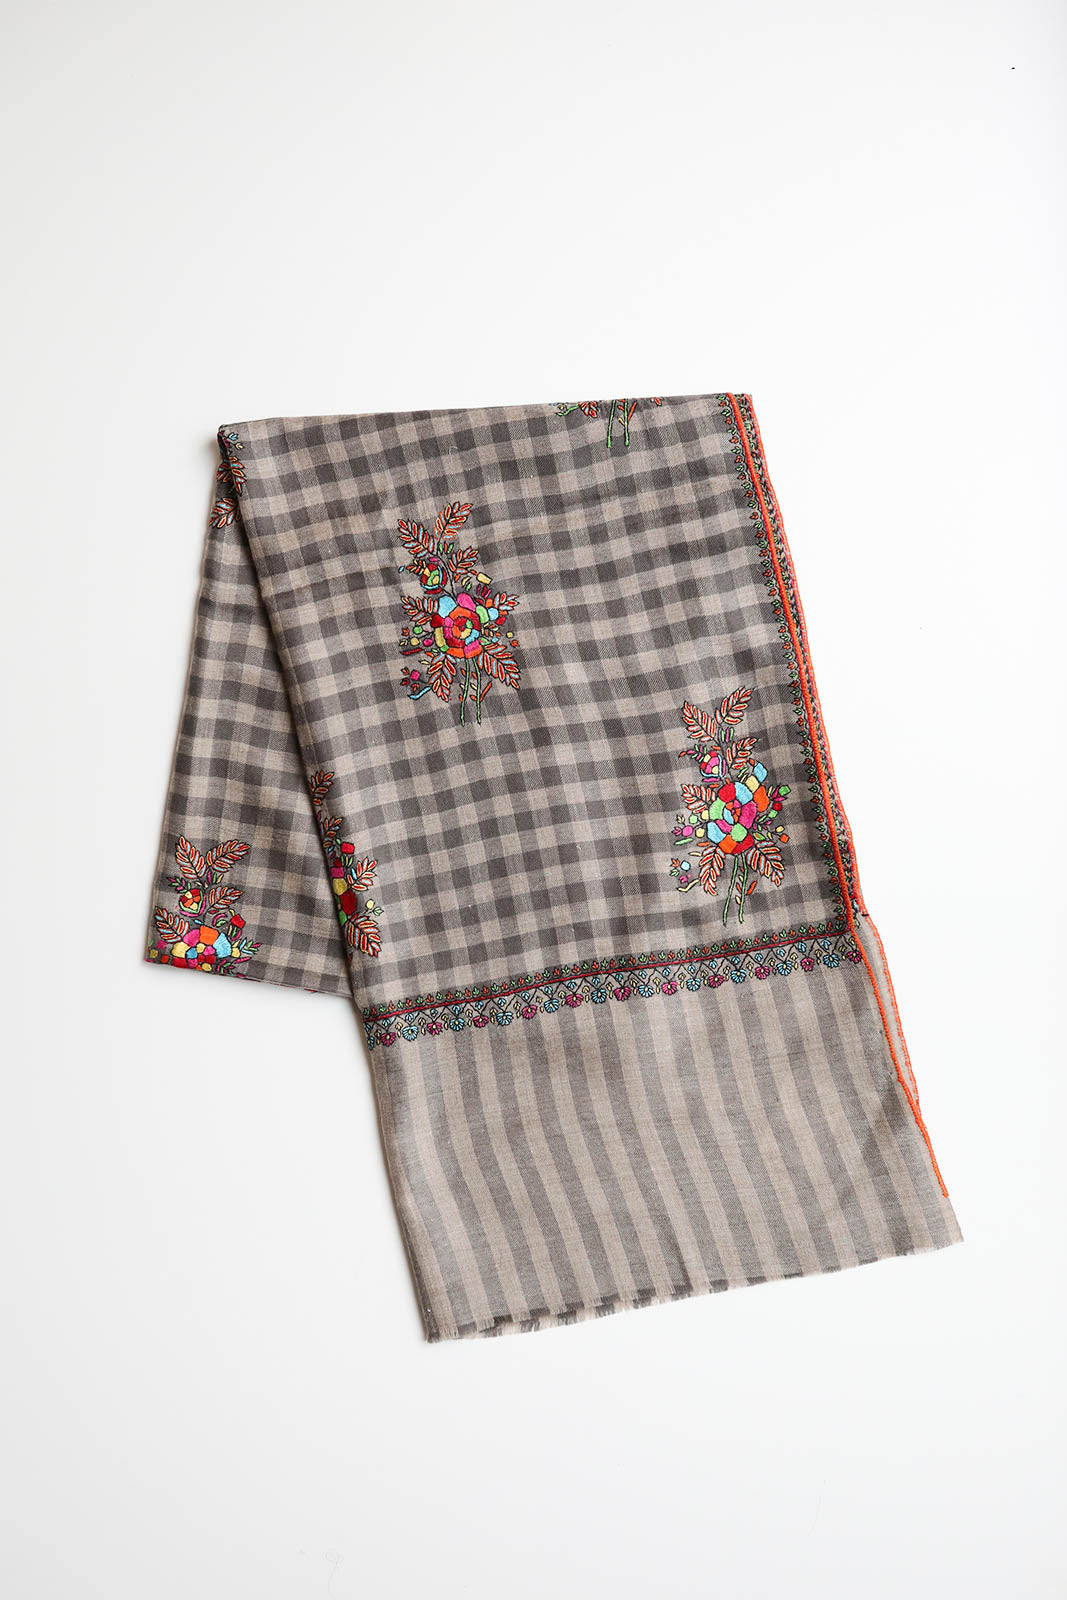 Schal Pashmina 1 in Grey Check Flowers